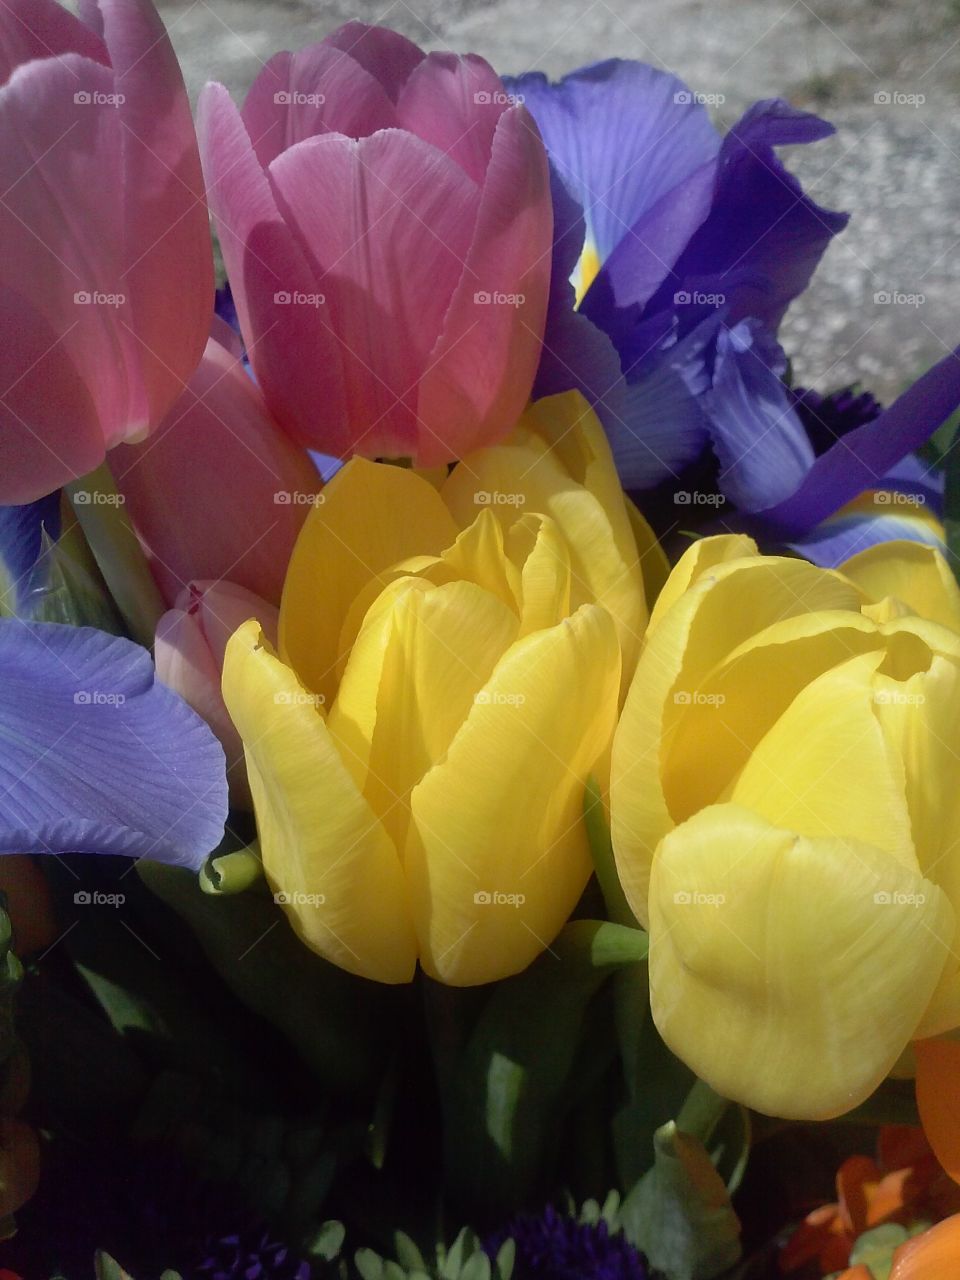 Spring!. Tulips are my favorite flower!